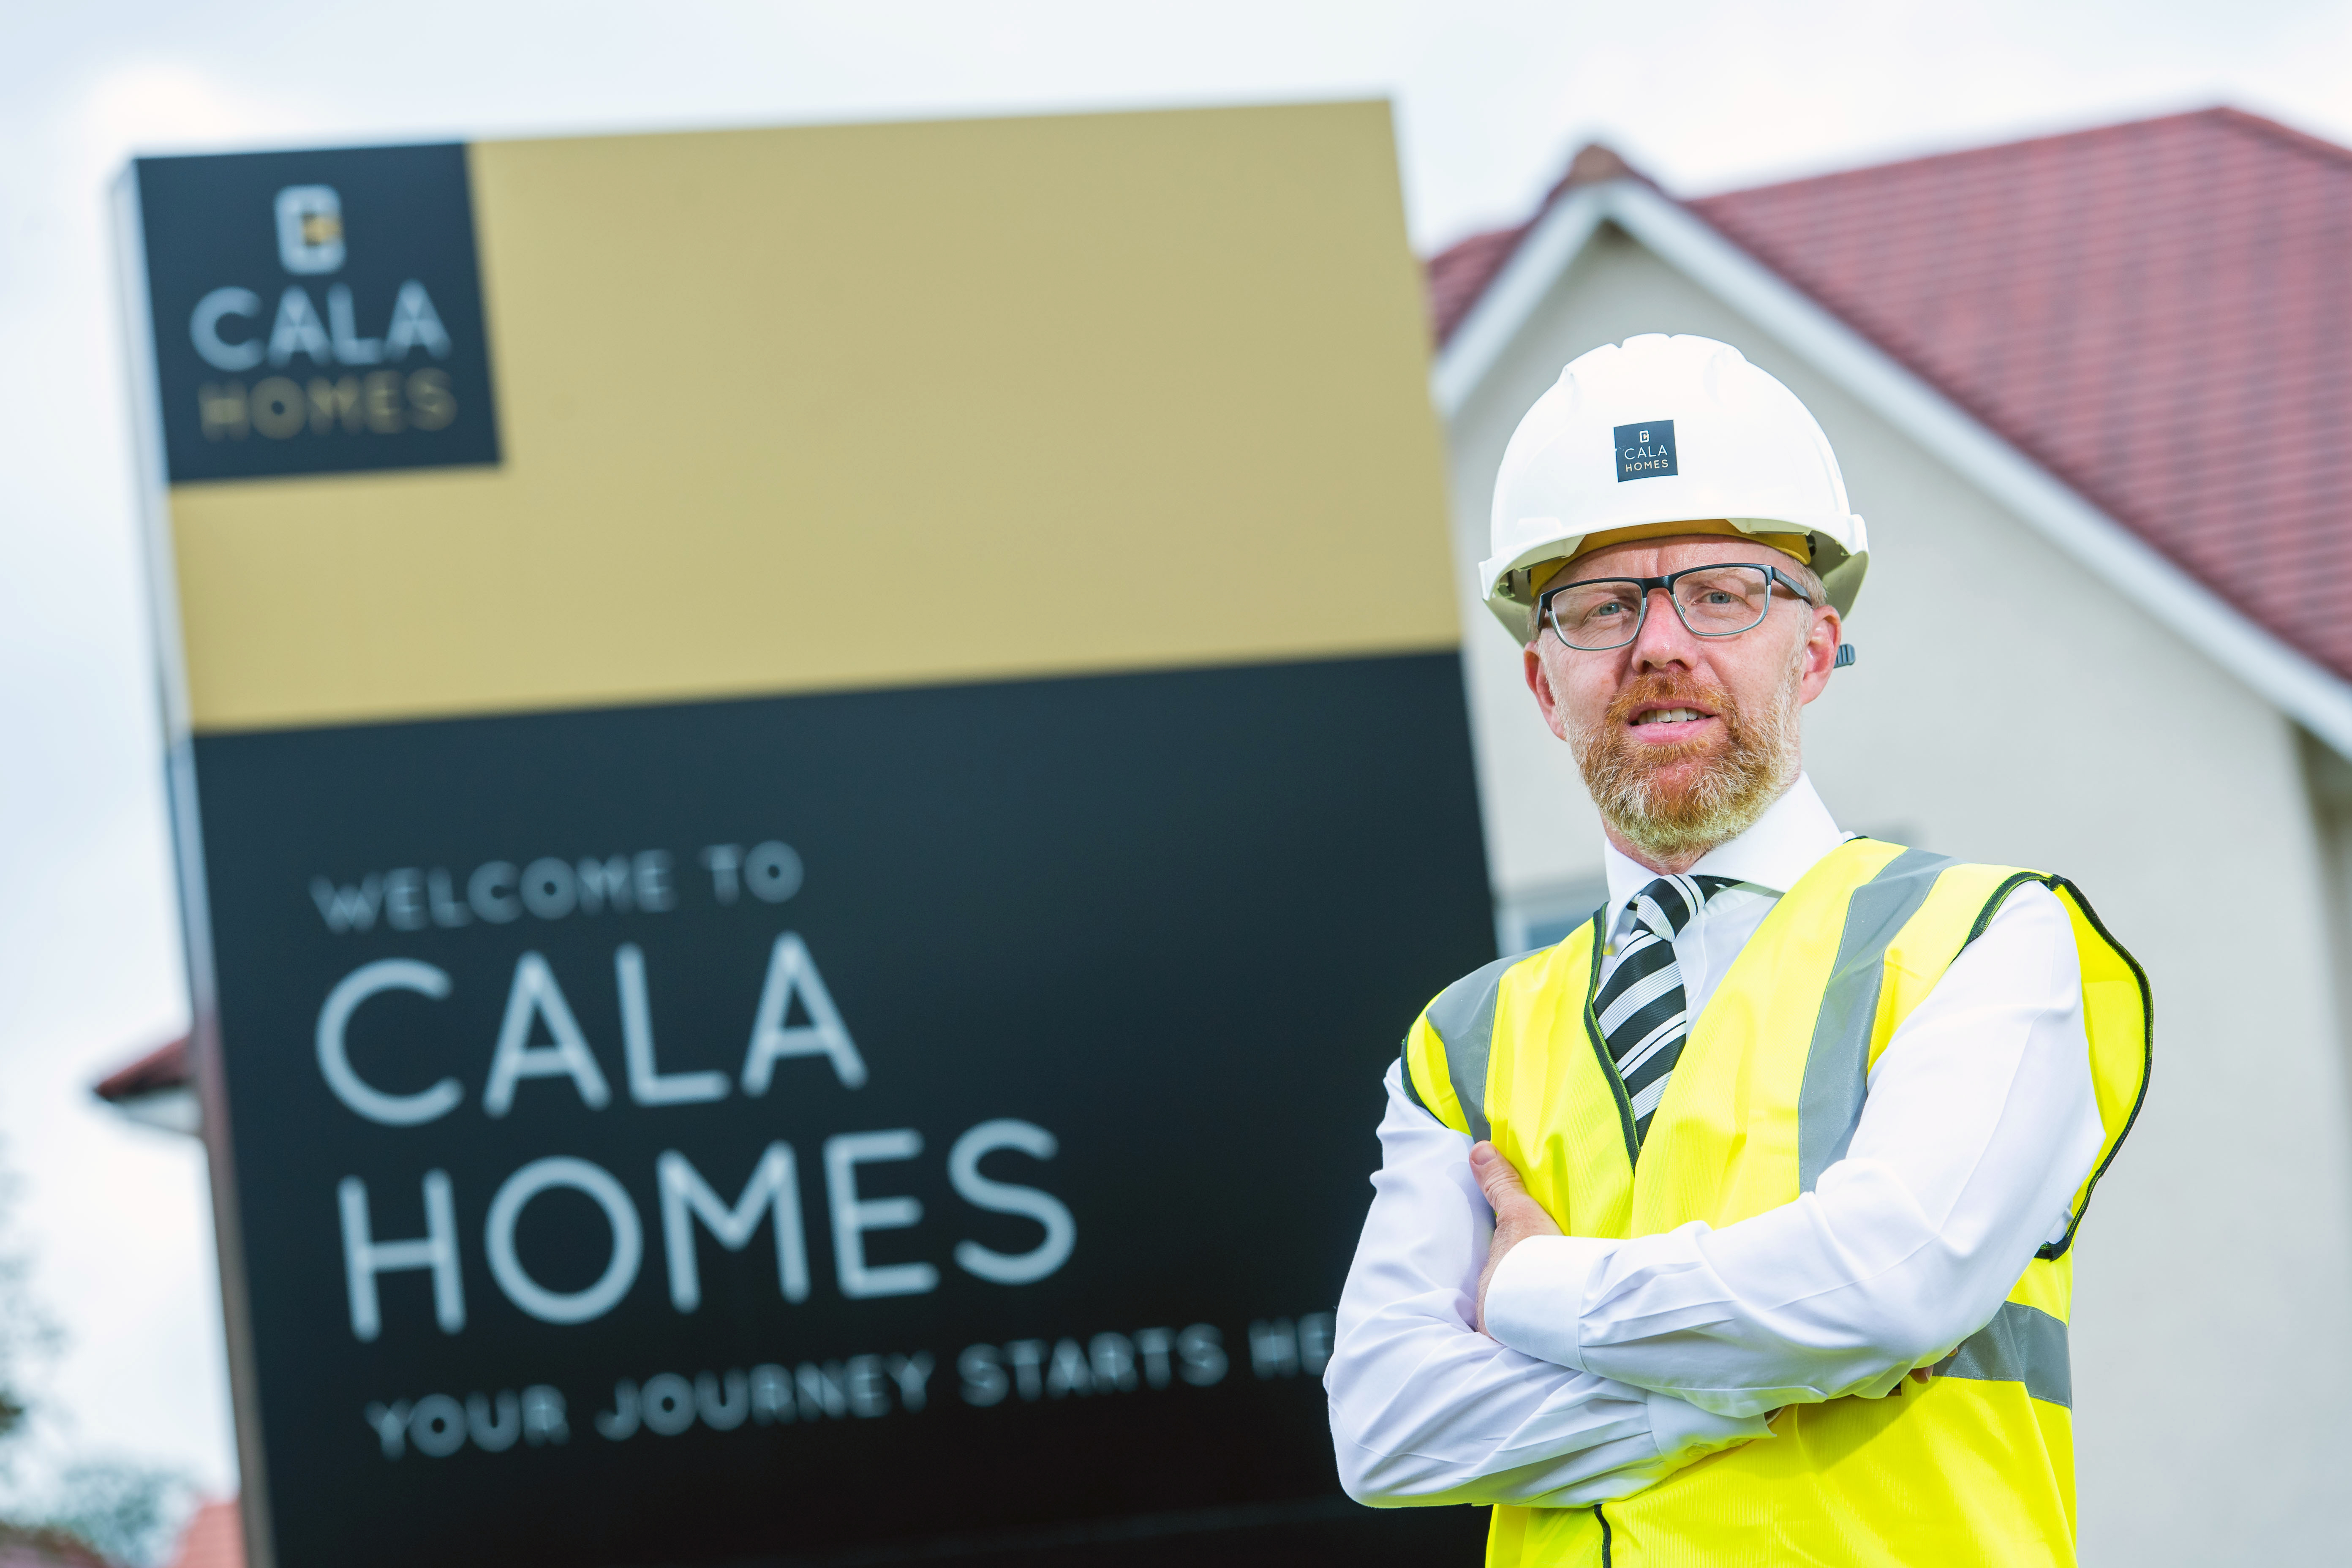 CALA Homes project manager to represent Scotland on national stage